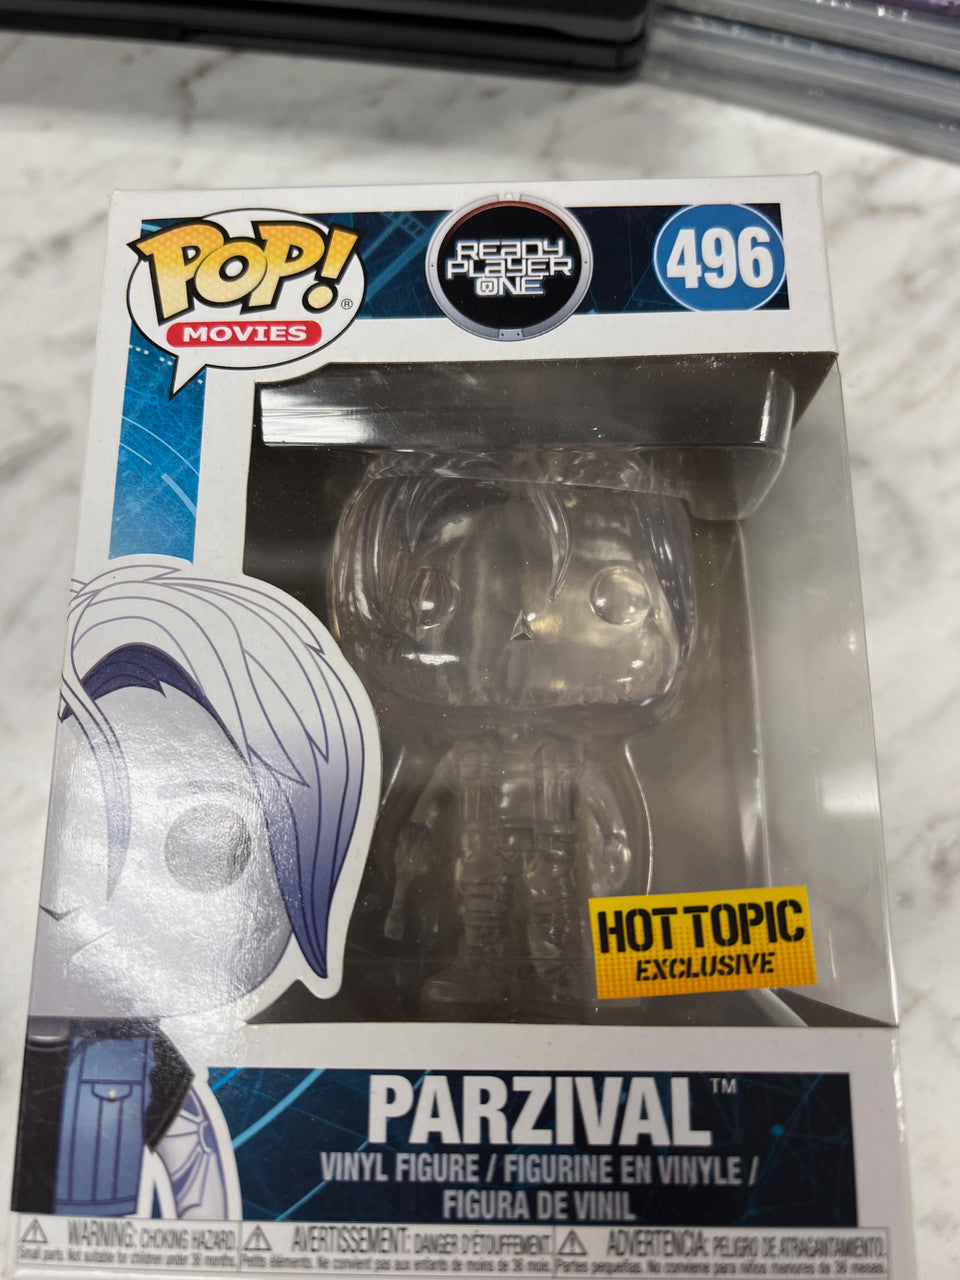 Parzival Ready Player One Hot Topic Exclusive Funko Pop figure 496